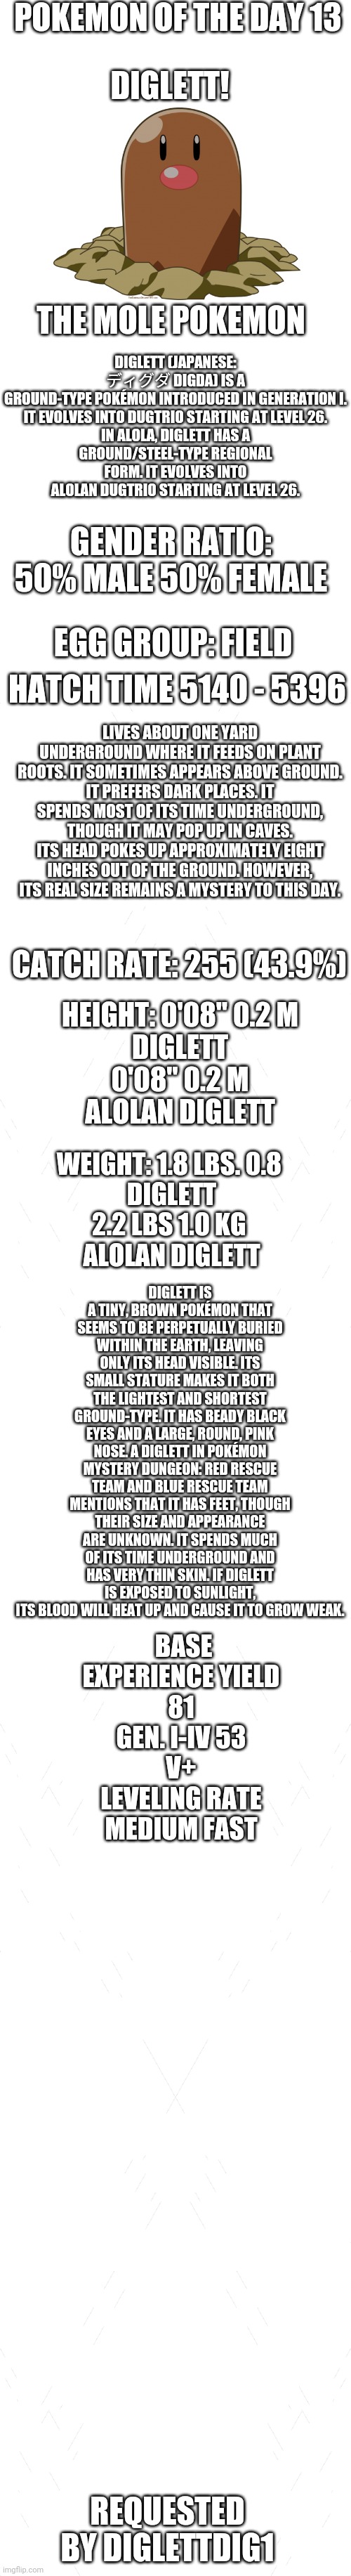 Pokemon of the day 13 | POKEMON OF THE DAY 13; DIGLETT! DIGLETT (JAPANESE: ディグダ DIGDA) IS A GROUND-TYPE POKÉMON INTRODUCED IN GENERATION I.

IT EVOLVES INTO DUGTRIO STARTING AT LEVEL 26.

IN ALOLA, DIGLETT HAS A GROUND/STEEL-TYPE REGIONAL FORM. IT EVOLVES INTO ALOLAN DUGTRIO STARTING AT LEVEL 26. THE MOLE POKEMON; GENDER RATIO: 50% MALE 50% FEMALE; EGG GROUP: FIELD; HATCH TIME 5140 - 5396; LIVES ABOUT ONE YARD UNDERGROUND WHERE IT FEEDS ON PLANT ROOTS. IT SOMETIMES APPEARS ABOVE GROUND.
IT PREFERS DARK PLACES. IT SPENDS MOST OF ITS TIME UNDERGROUND, THOUGH IT MAY POP UP IN CAVES.	ITS HEAD POKES UP APPROXIMATELY EIGHT INCHES OUT OF THE GROUND. HOWEVER, ITS REAL SIZE REMAINS A MYSTERY TO THIS DAY. CATCH RATE: 255 (43.9%); HEIGHT: 0'08"	0.2 M
DIGLETT
0'08"	0.2 M
ALOLAN DIGLETT; DIGLETT IS A TINY, BROWN POKÉMON THAT SEEMS TO BE PERPETUALLY BURIED WITHIN THE EARTH, LEAVING ONLY ITS HEAD VISIBLE. ITS SMALL STATURE MAKES IT BOTH THE LIGHTEST AND SHORTEST GROUND-TYPE. IT HAS BEADY BLACK EYES AND A LARGE, ROUND, PINK NOSE. A DIGLETT IN POKÉMON MYSTERY DUNGEON: RED RESCUE TEAM AND BLUE RESCUE TEAM MENTIONS THAT IT HAS FEET, THOUGH THEIR SIZE AND APPEARANCE ARE UNKNOWN. IT SPENDS MUCH OF ITS TIME UNDERGROUND AND HAS VERY THIN SKIN. IF DIGLETT IS EXPOSED TO SUNLIGHT, ITS BLOOD WILL HEAT UP AND CAUSE IT TO GROW WEAK. WEIGHT: 1.8 LBS. 0.8 
DIGLETT
2.2 LBS 1.0 KG 
ALOLAN DIGLETT; BASE EXPERIENCE YIELD
81
GEN. I-IV	53
V+
LEVELING RATE
MEDIUM FAST; REQUESTED BY DIGLETTDIG1 | image tagged in memes,blank transparent square,pokemon | made w/ Imgflip meme maker